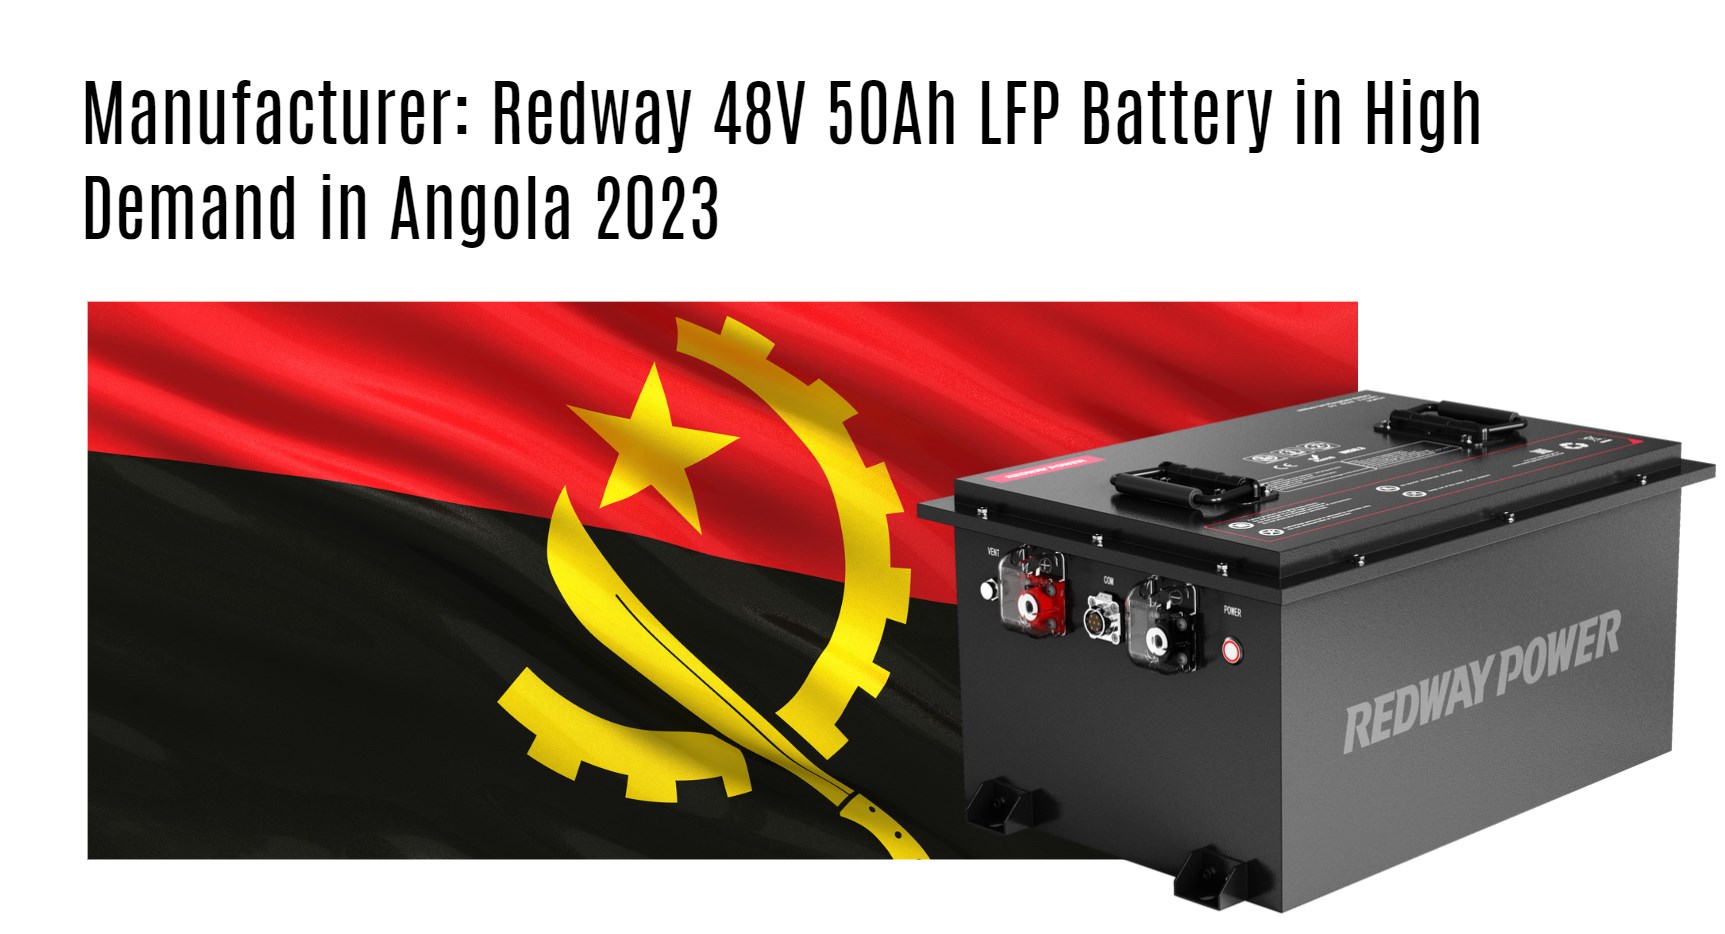 Manufacturer: Redway 48V 50Ah LFP Battery in High Demand in Angola 2023